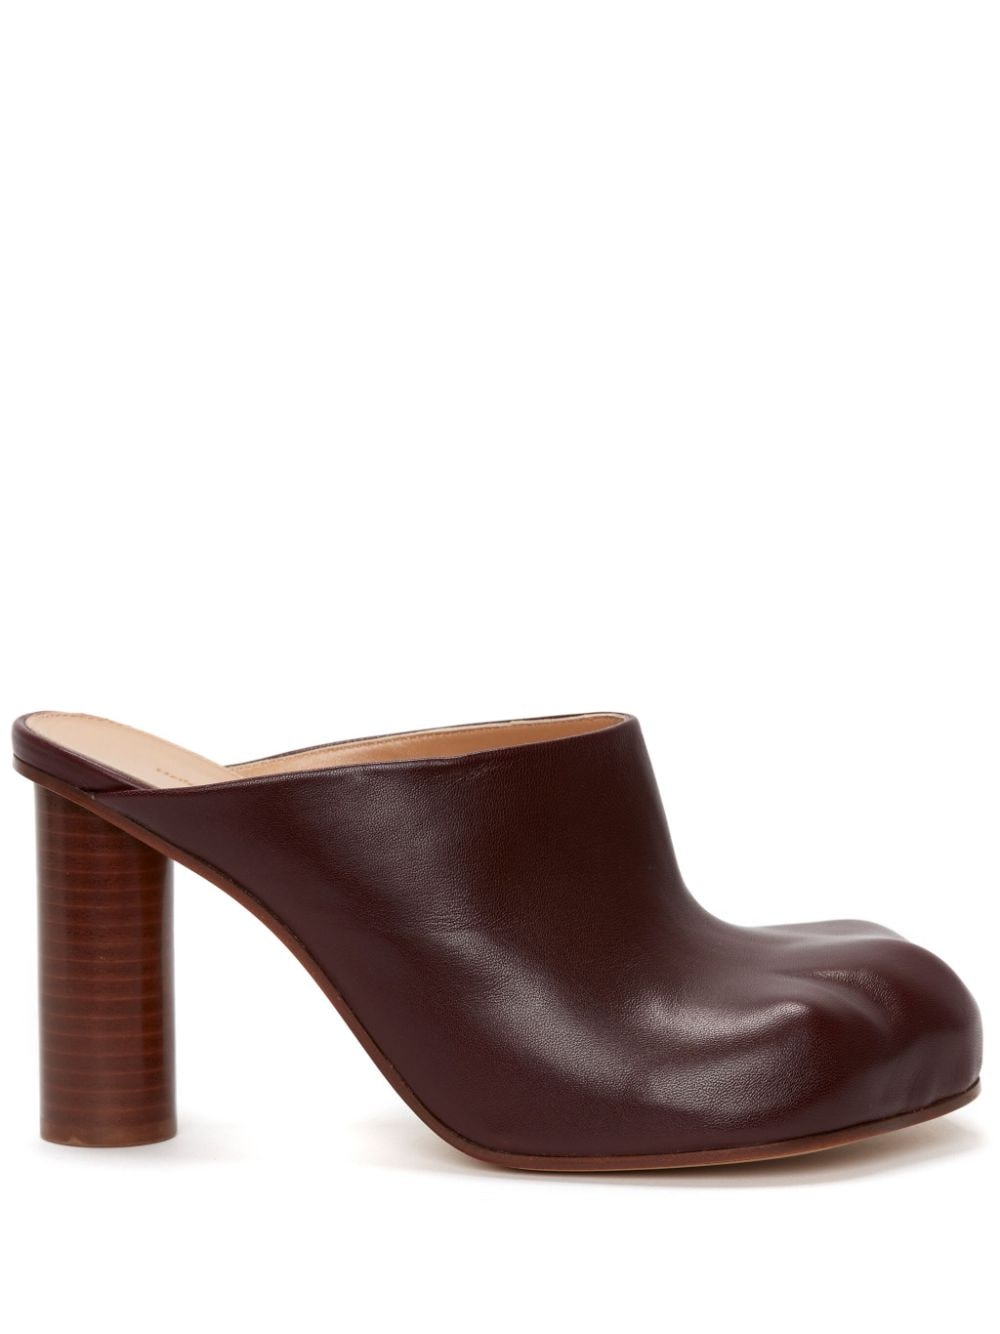 JW Anderson Paw leather mules - Brown